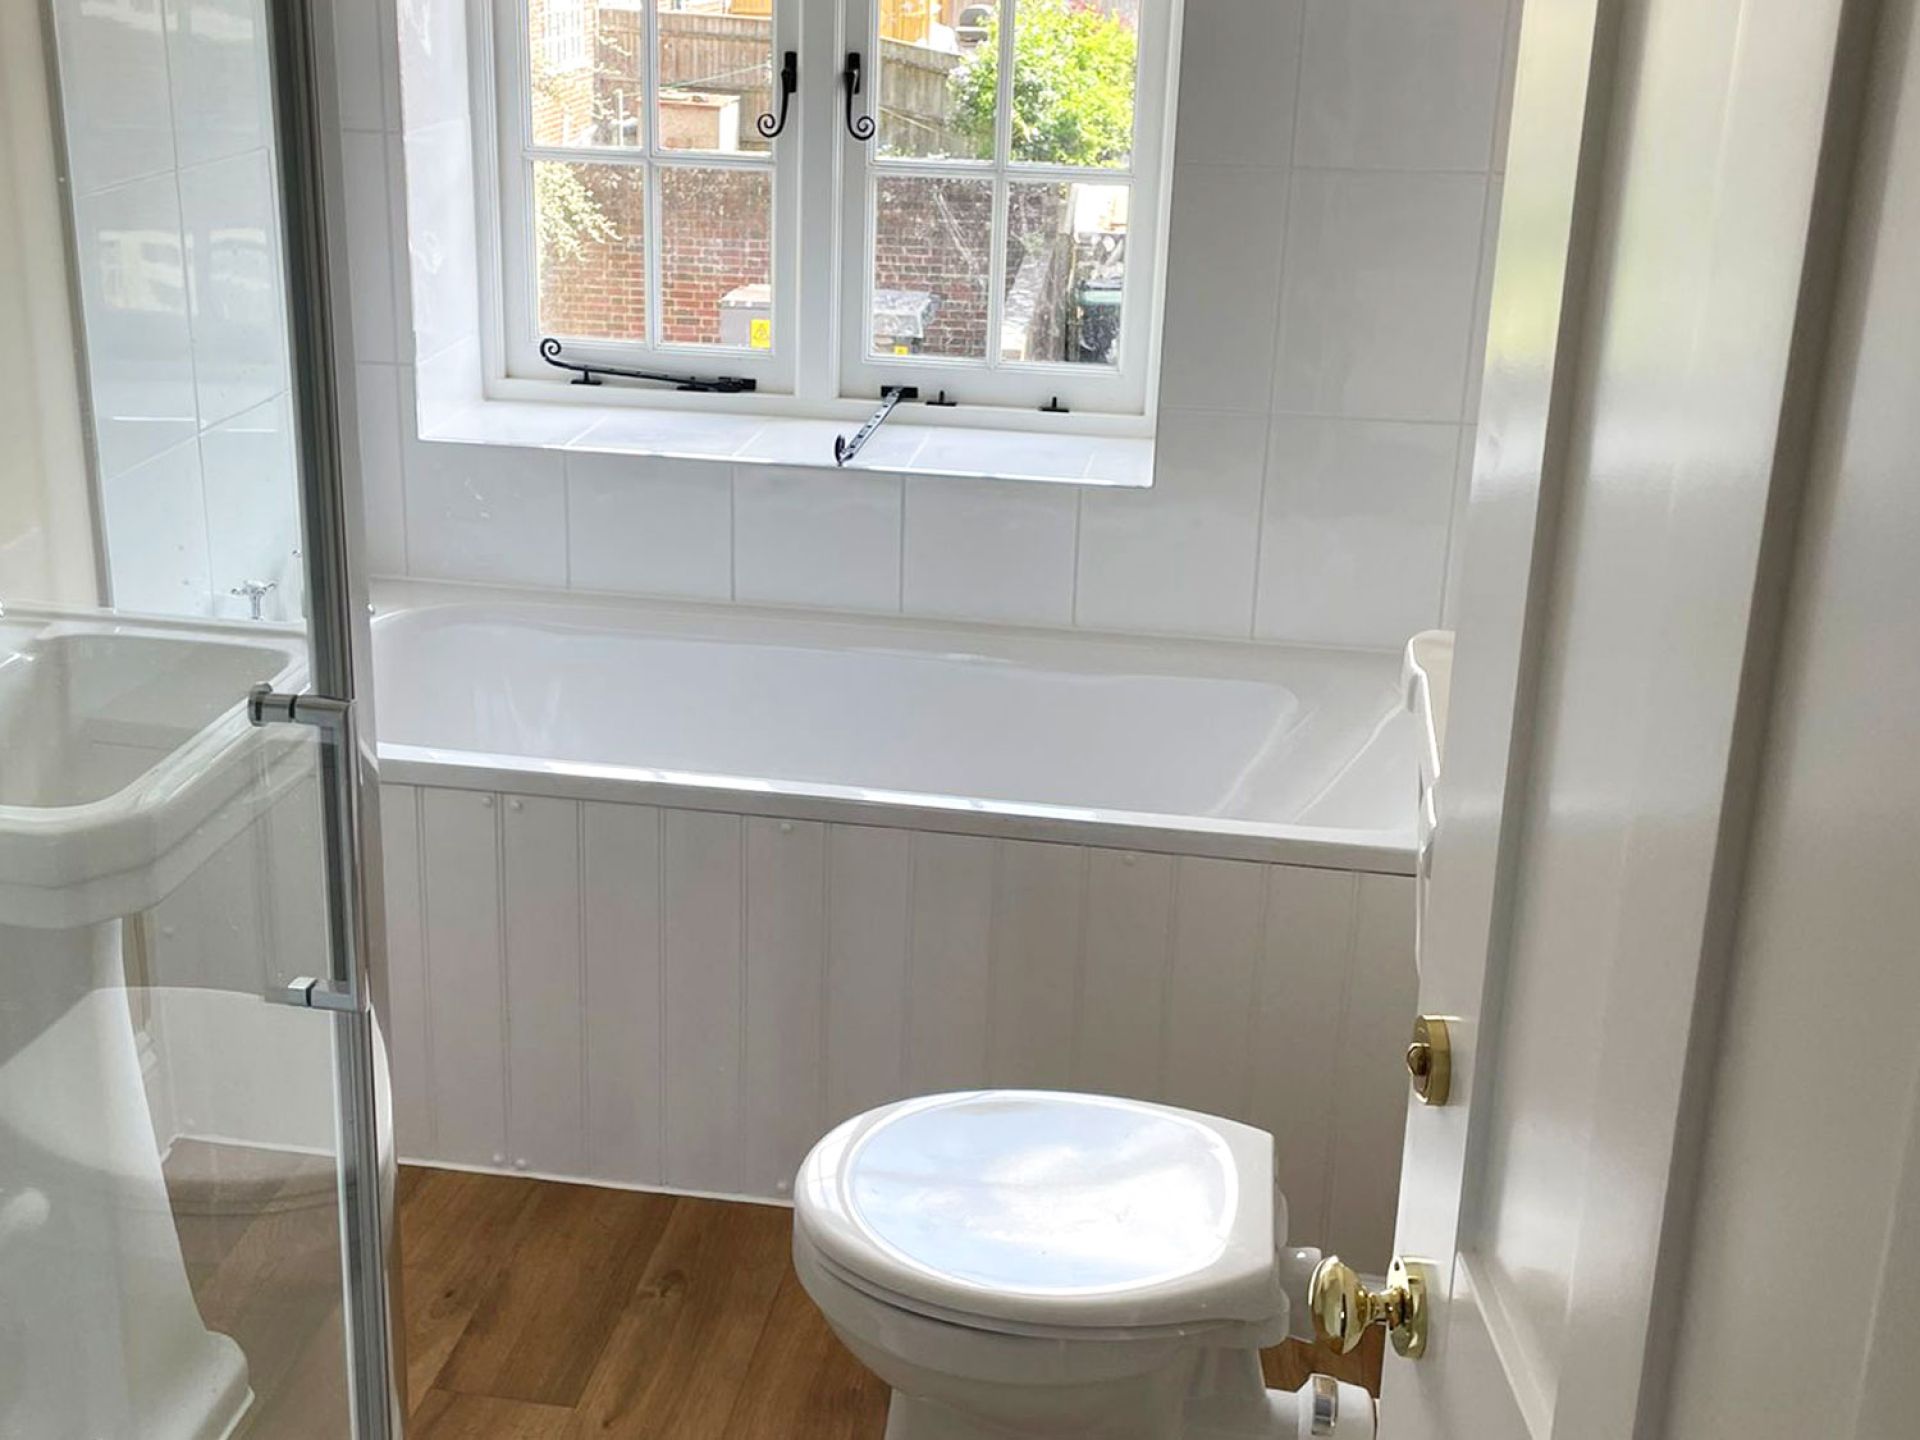 Completed and refurbished toilet in cranborne house with white walls and details.